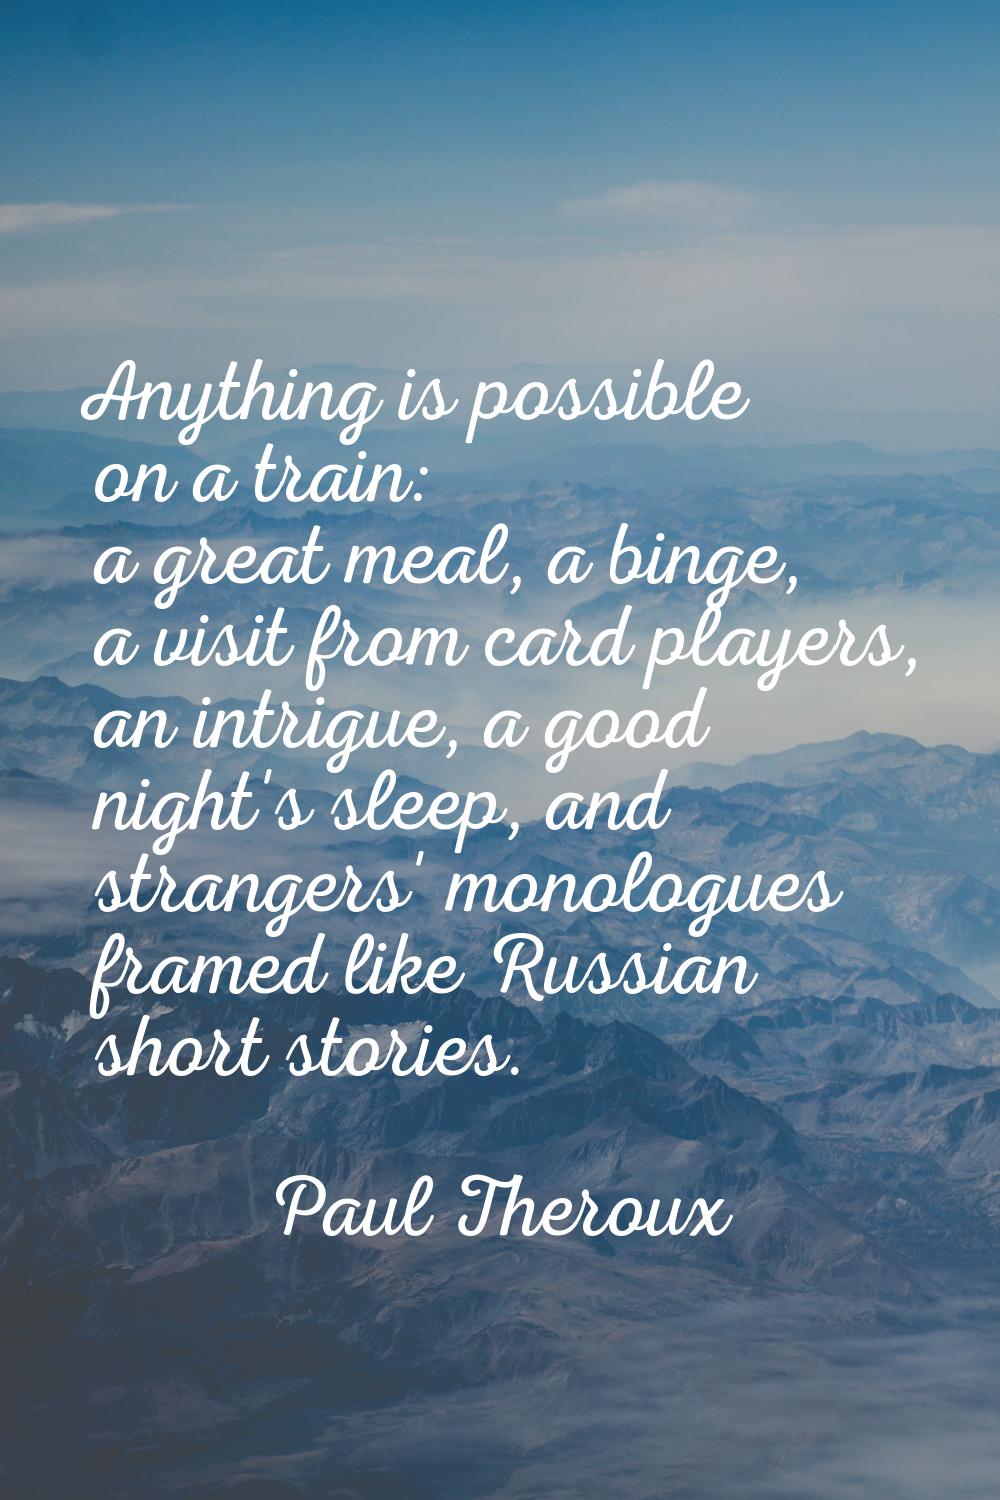 Anything is possible on a train: a great meal, a binge, a visit from card players, an intrigue, a g